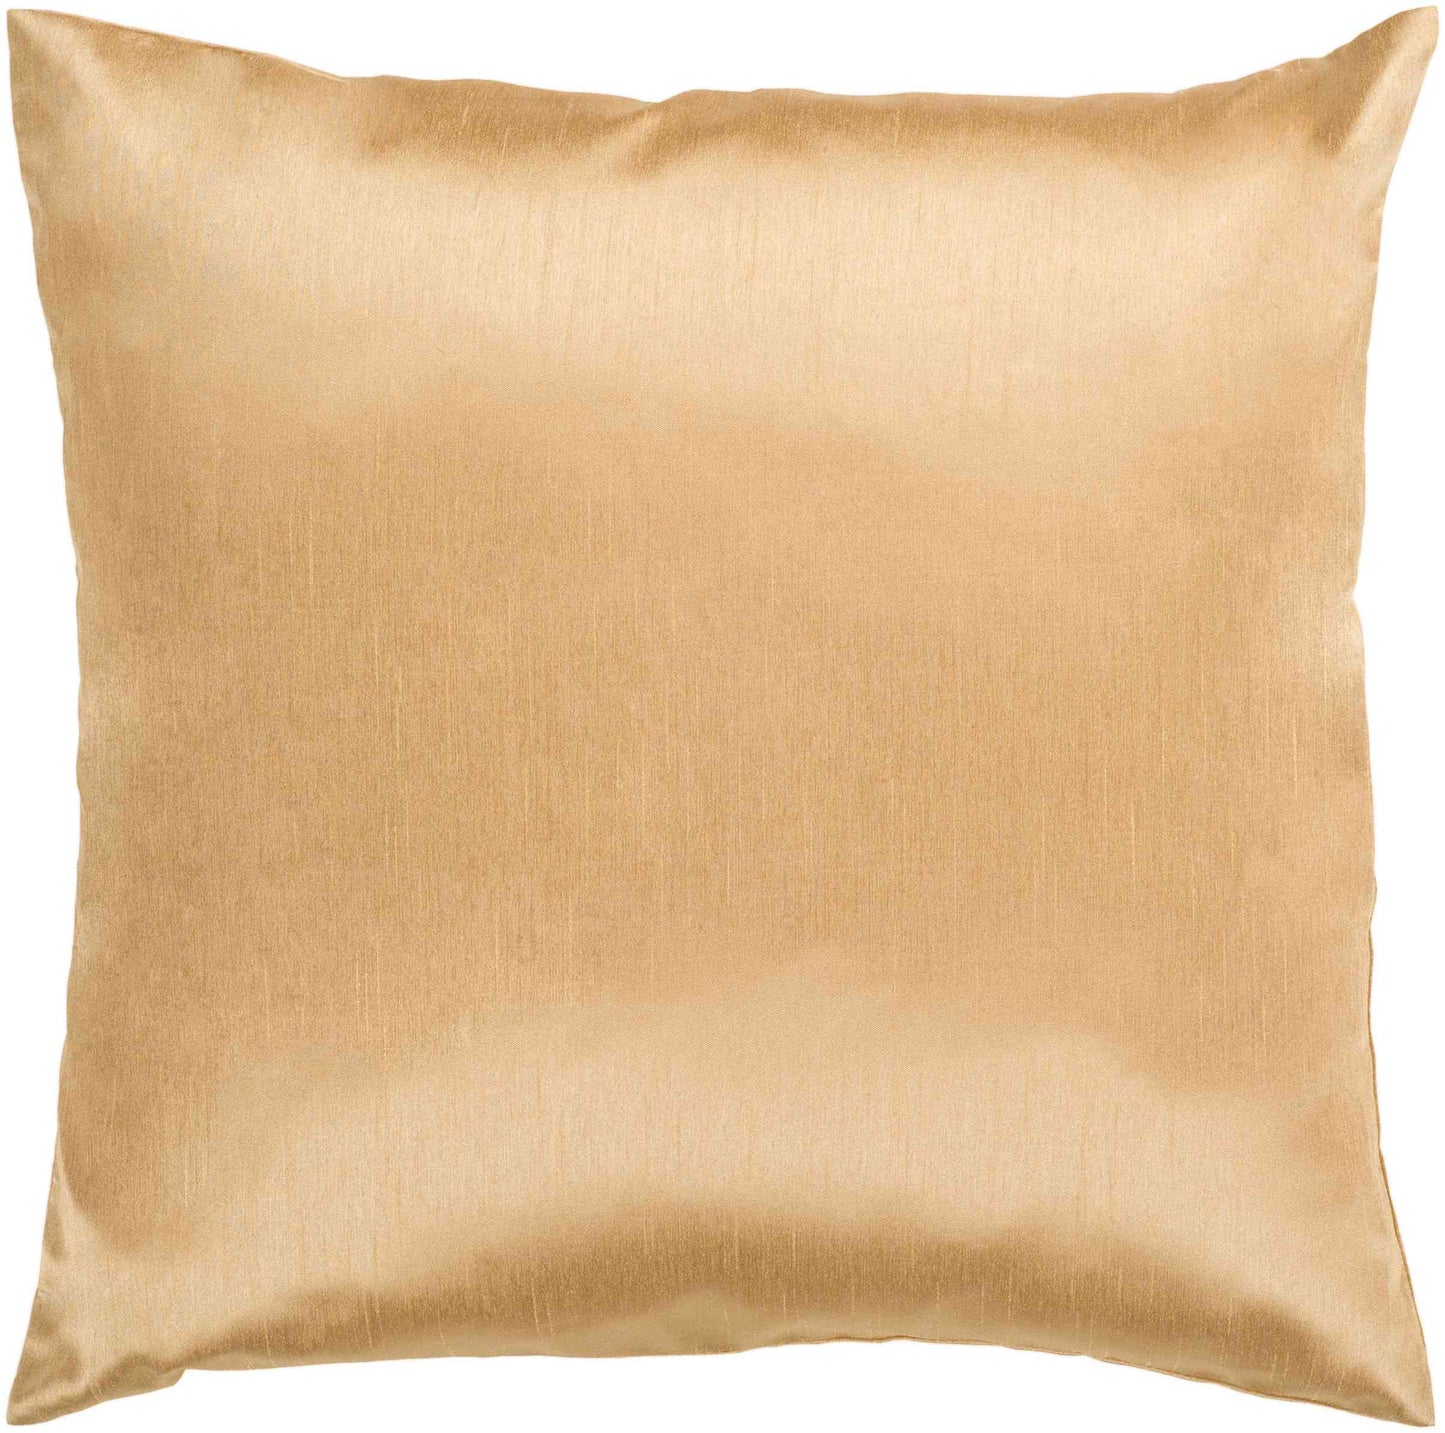 Rouvroy Mustard Pillow Cover